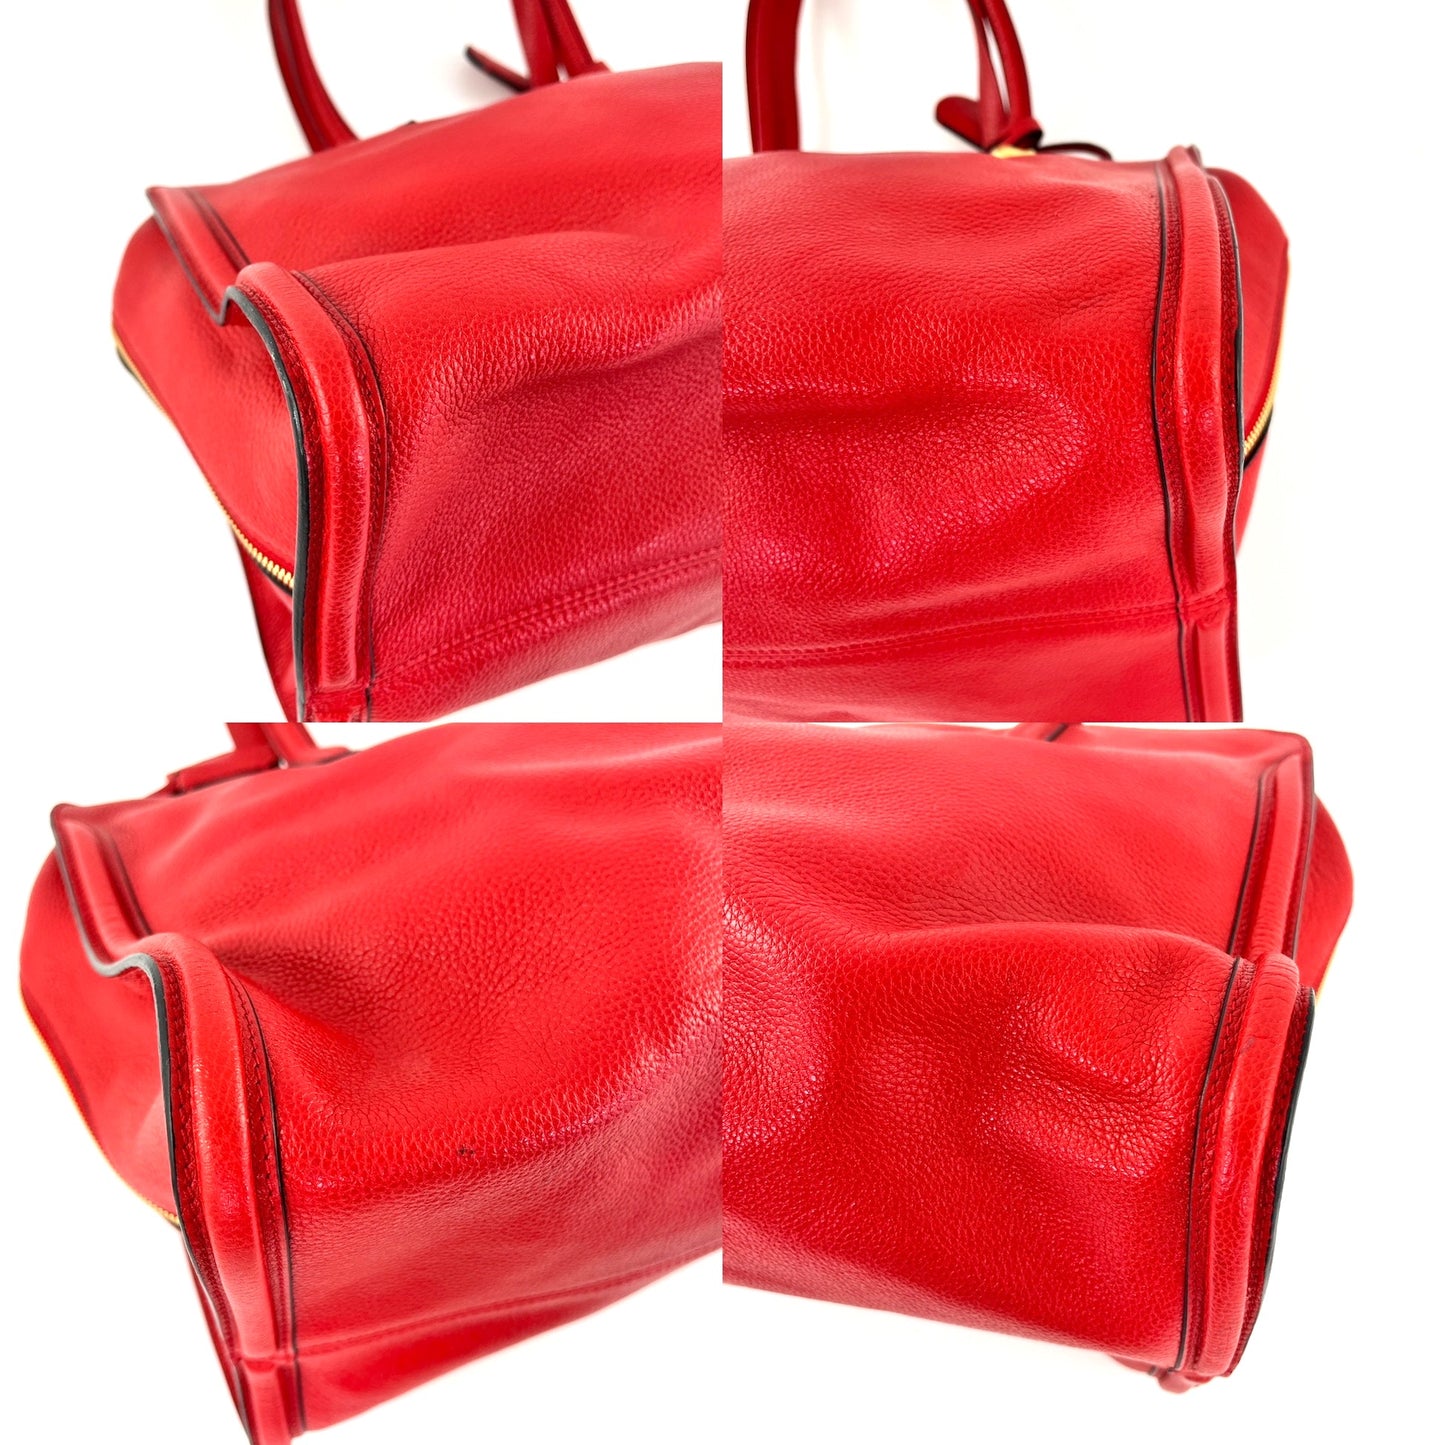 Alexander McQueen Red Grained Leather Tote